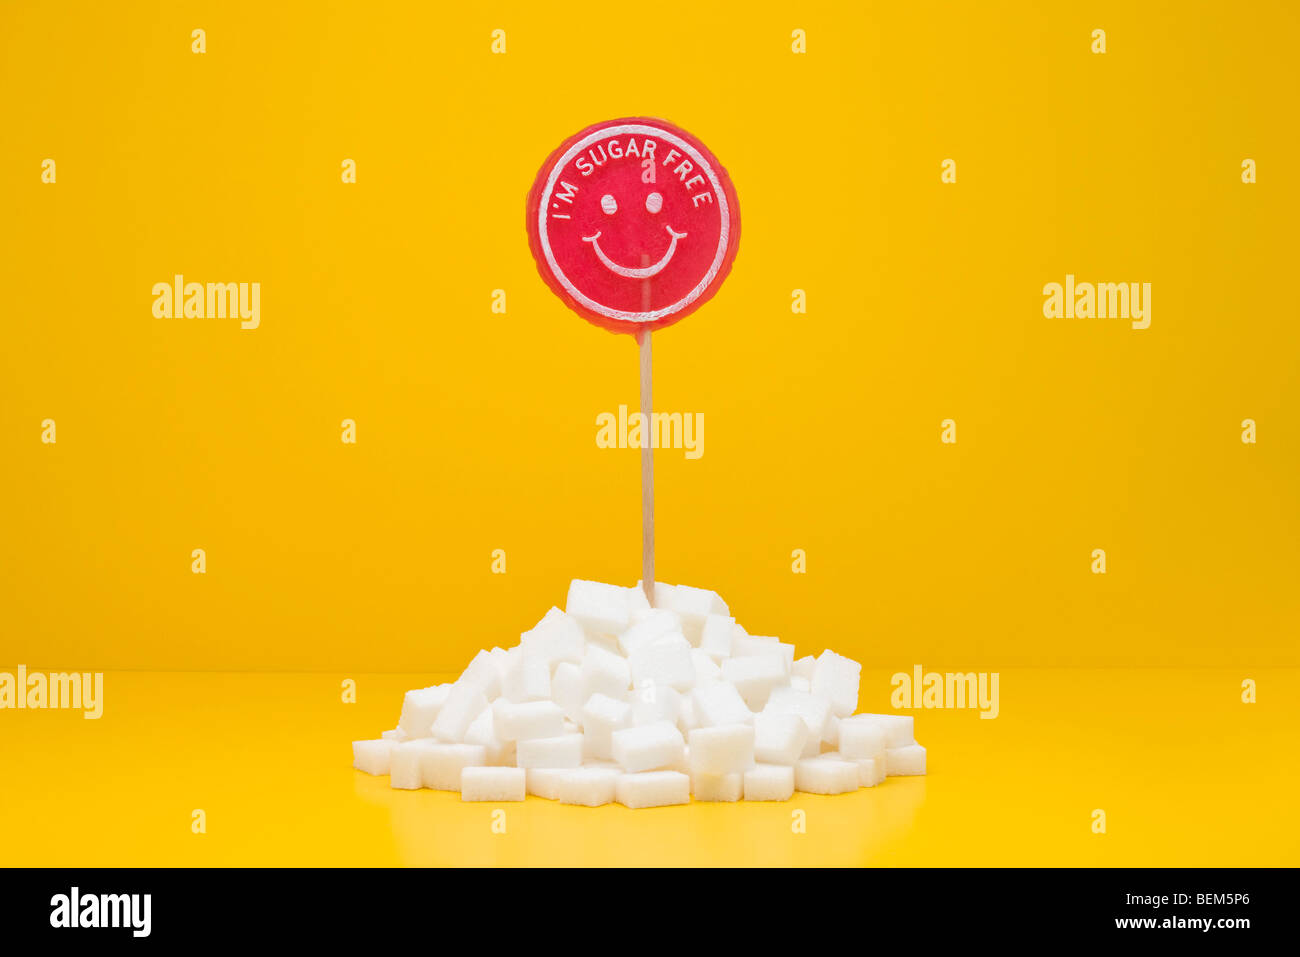 Food concept, sugar-free lollipop sticking out of pile of sugar cubes Stock Photo